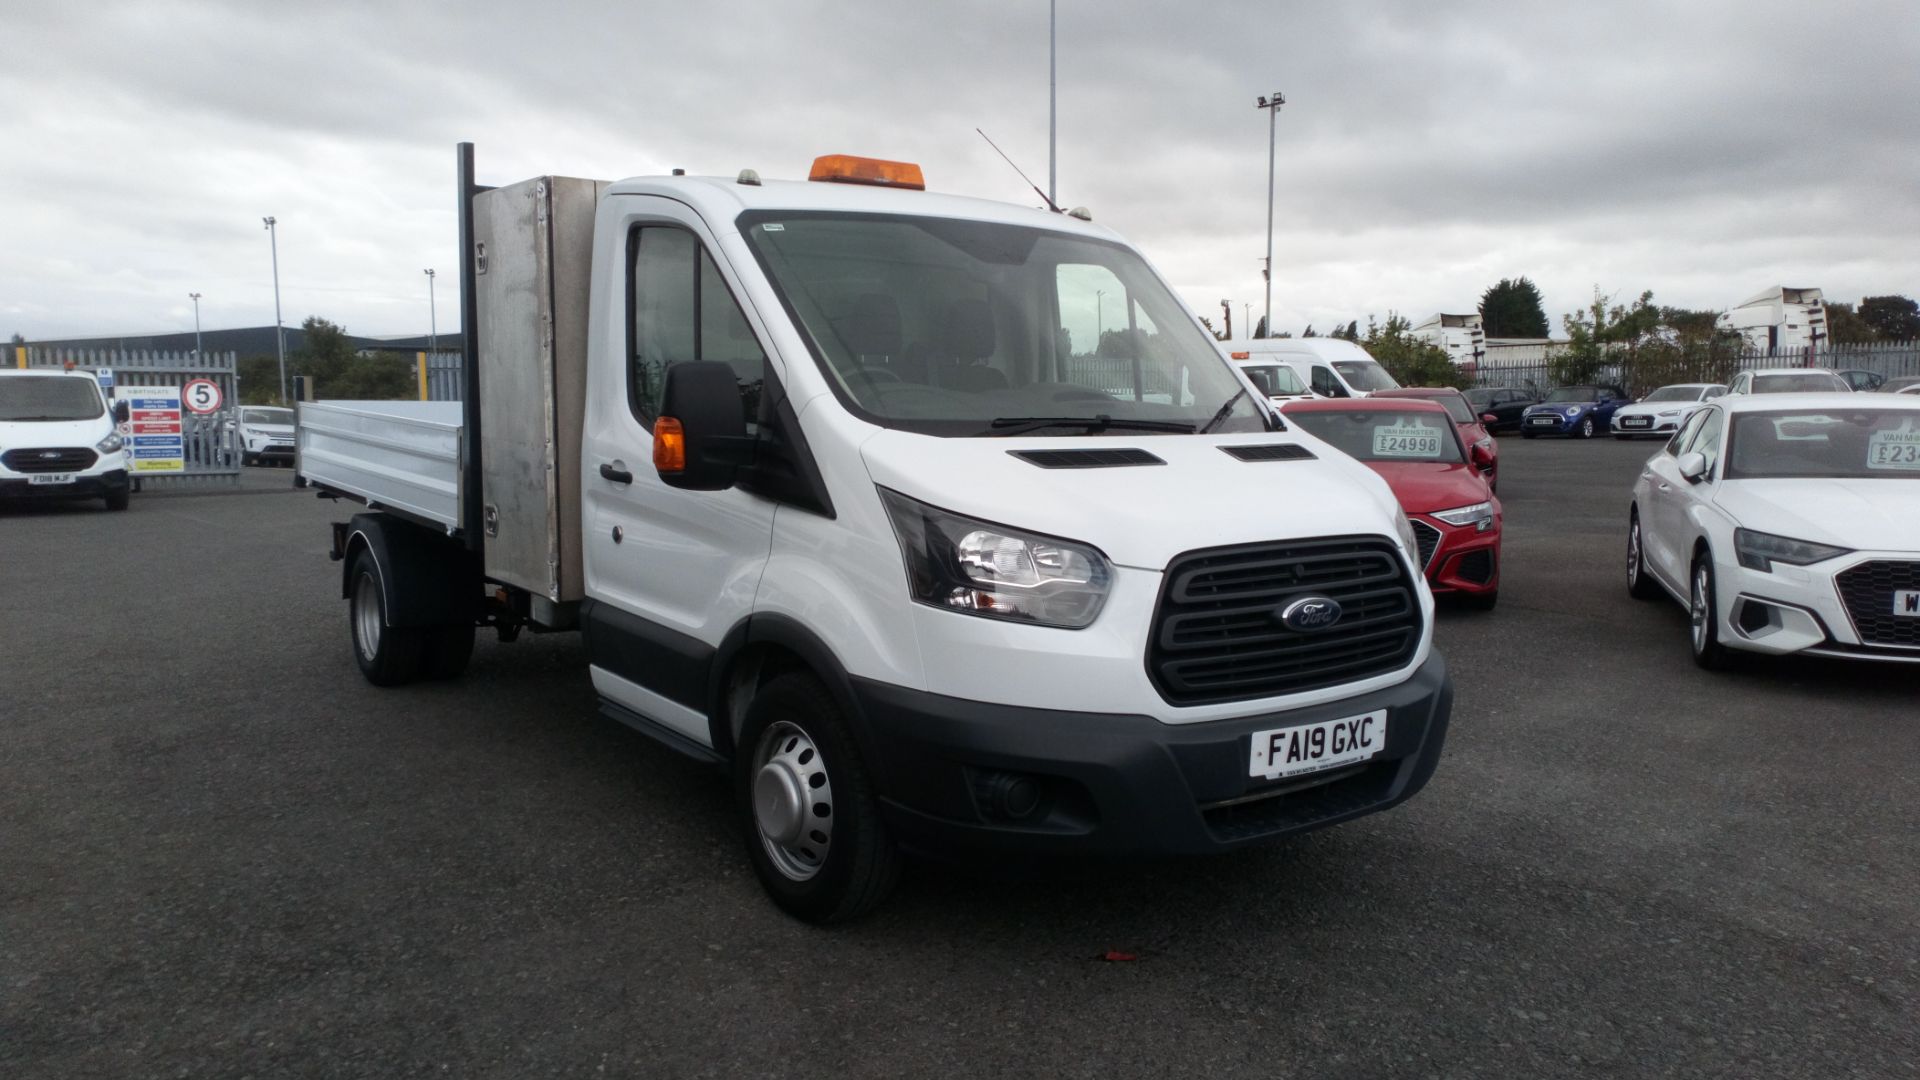 2019 Ford Transit 2.0 Tdci 130Ps Chassis Cab (FA19GXC)